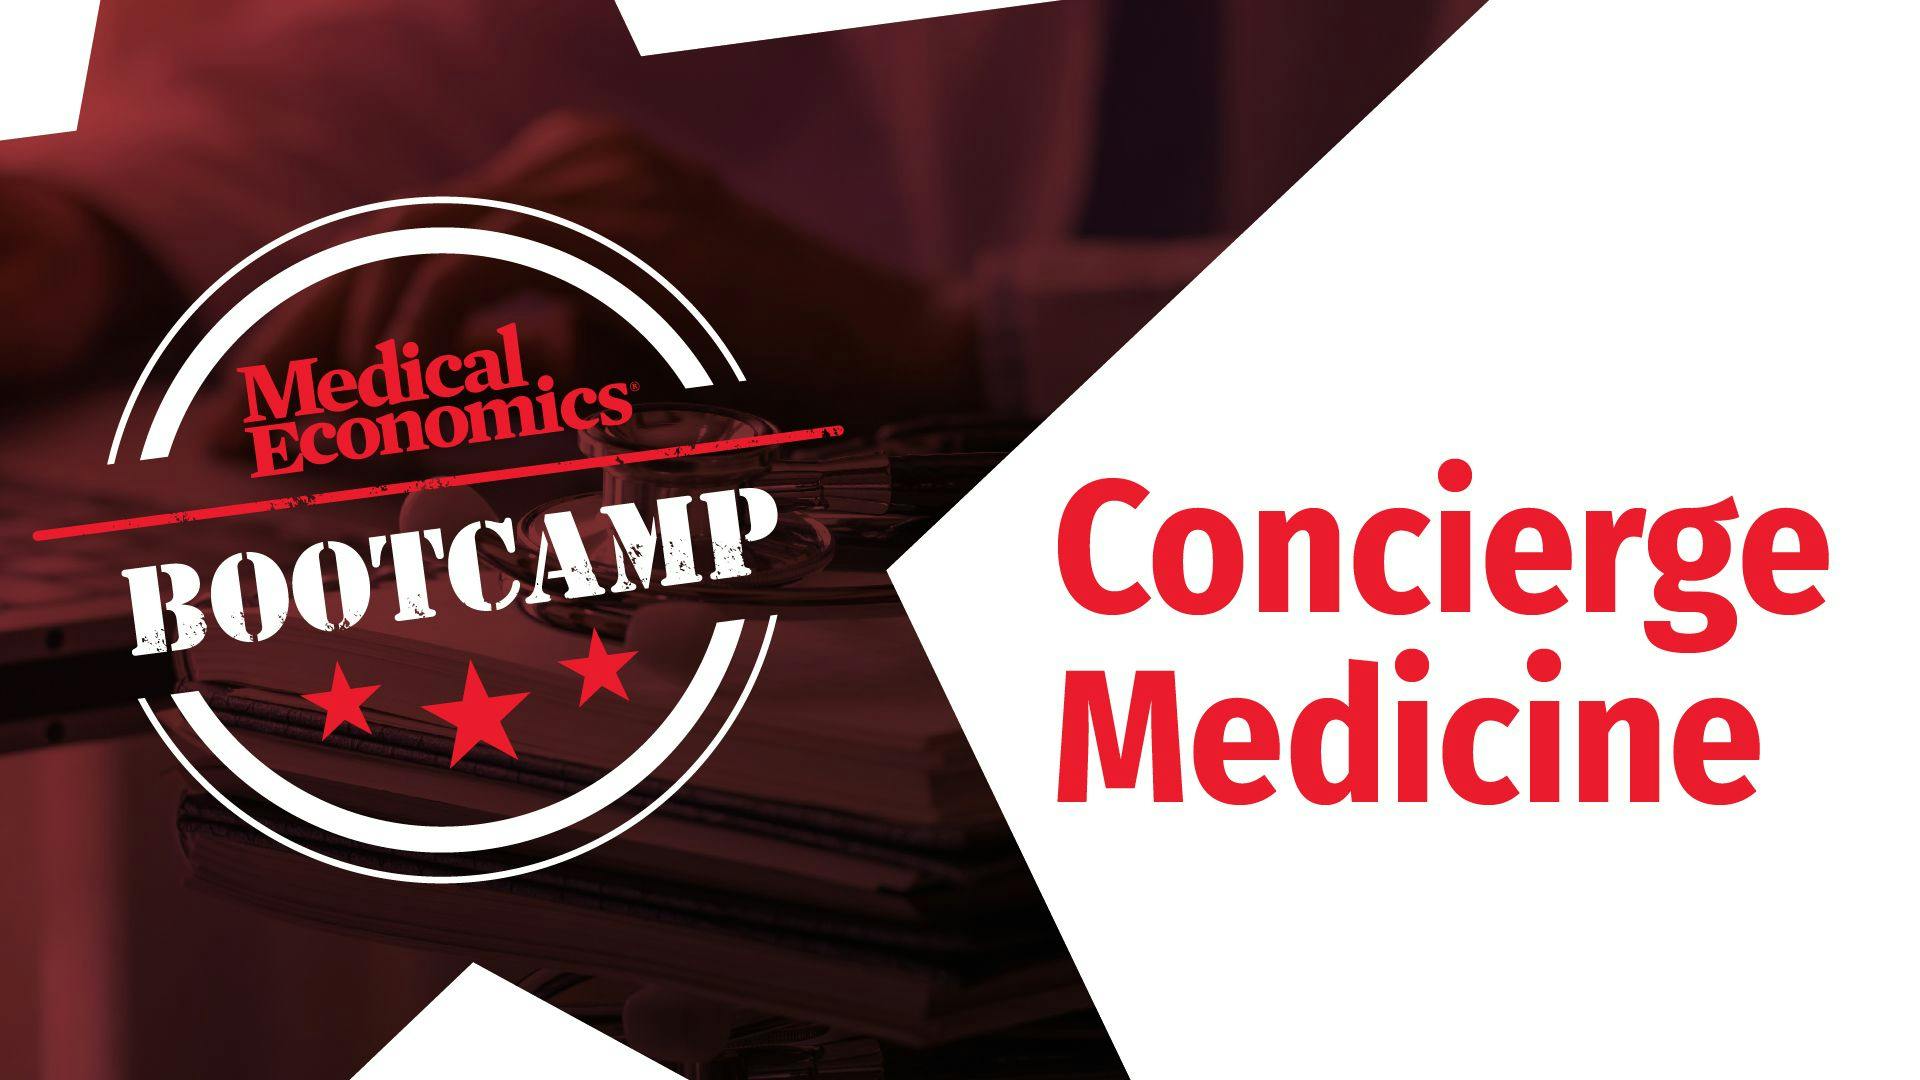 What it's like to be a concierge medicine doctor